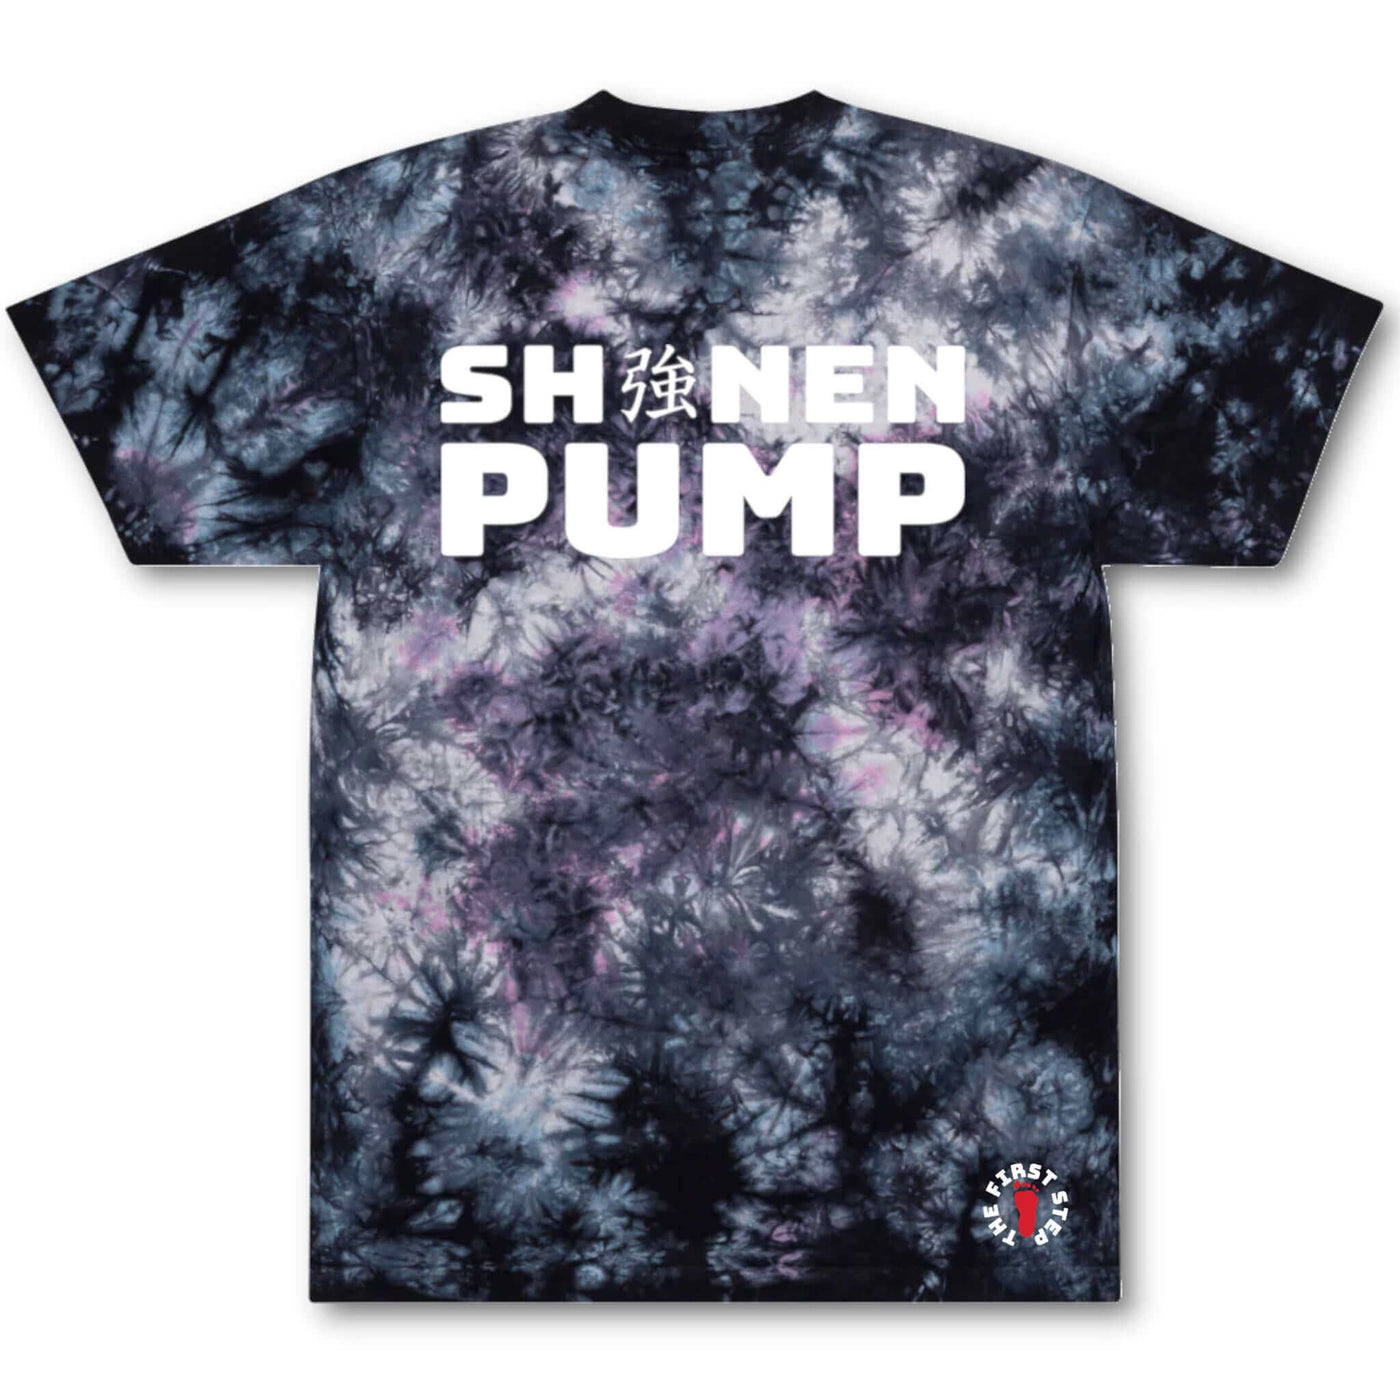 Black and white tie-dye pump cover with the words Shonen Pump printed on it